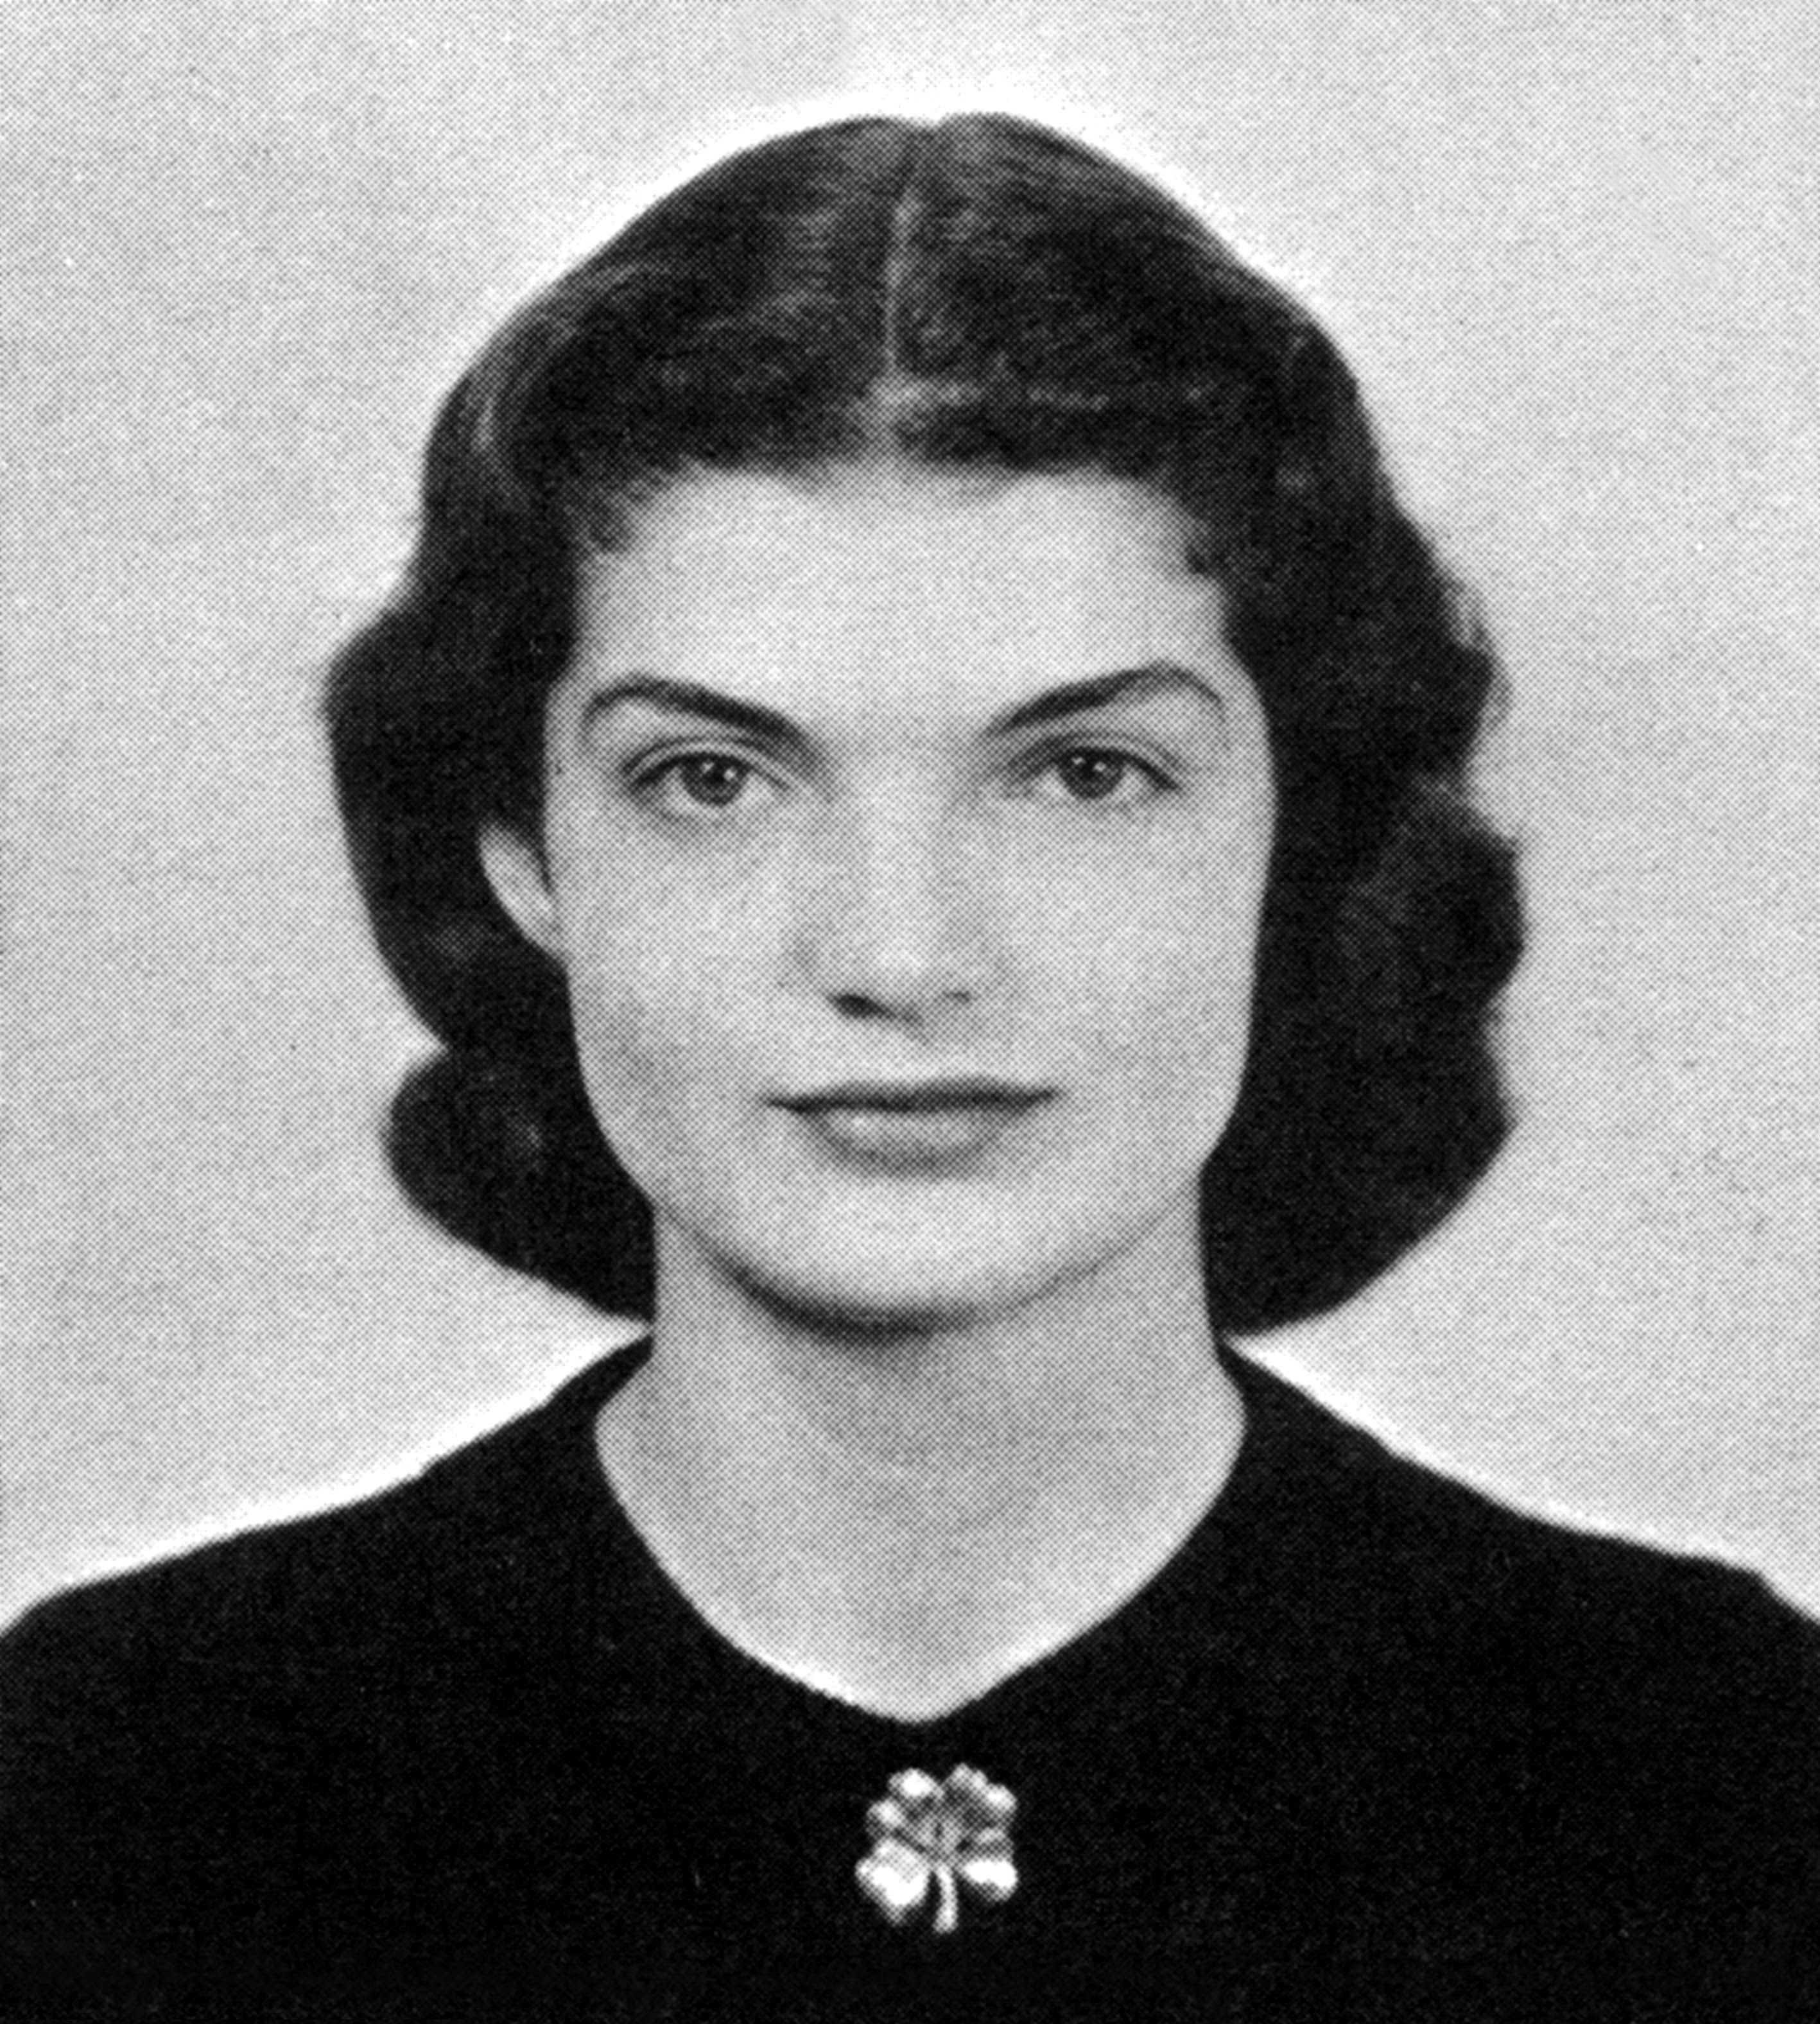 Jacqueline Lee Bouvier who was later known as Jackie Kennedy on October 1, 1950. | Source: Apic/Getty Images